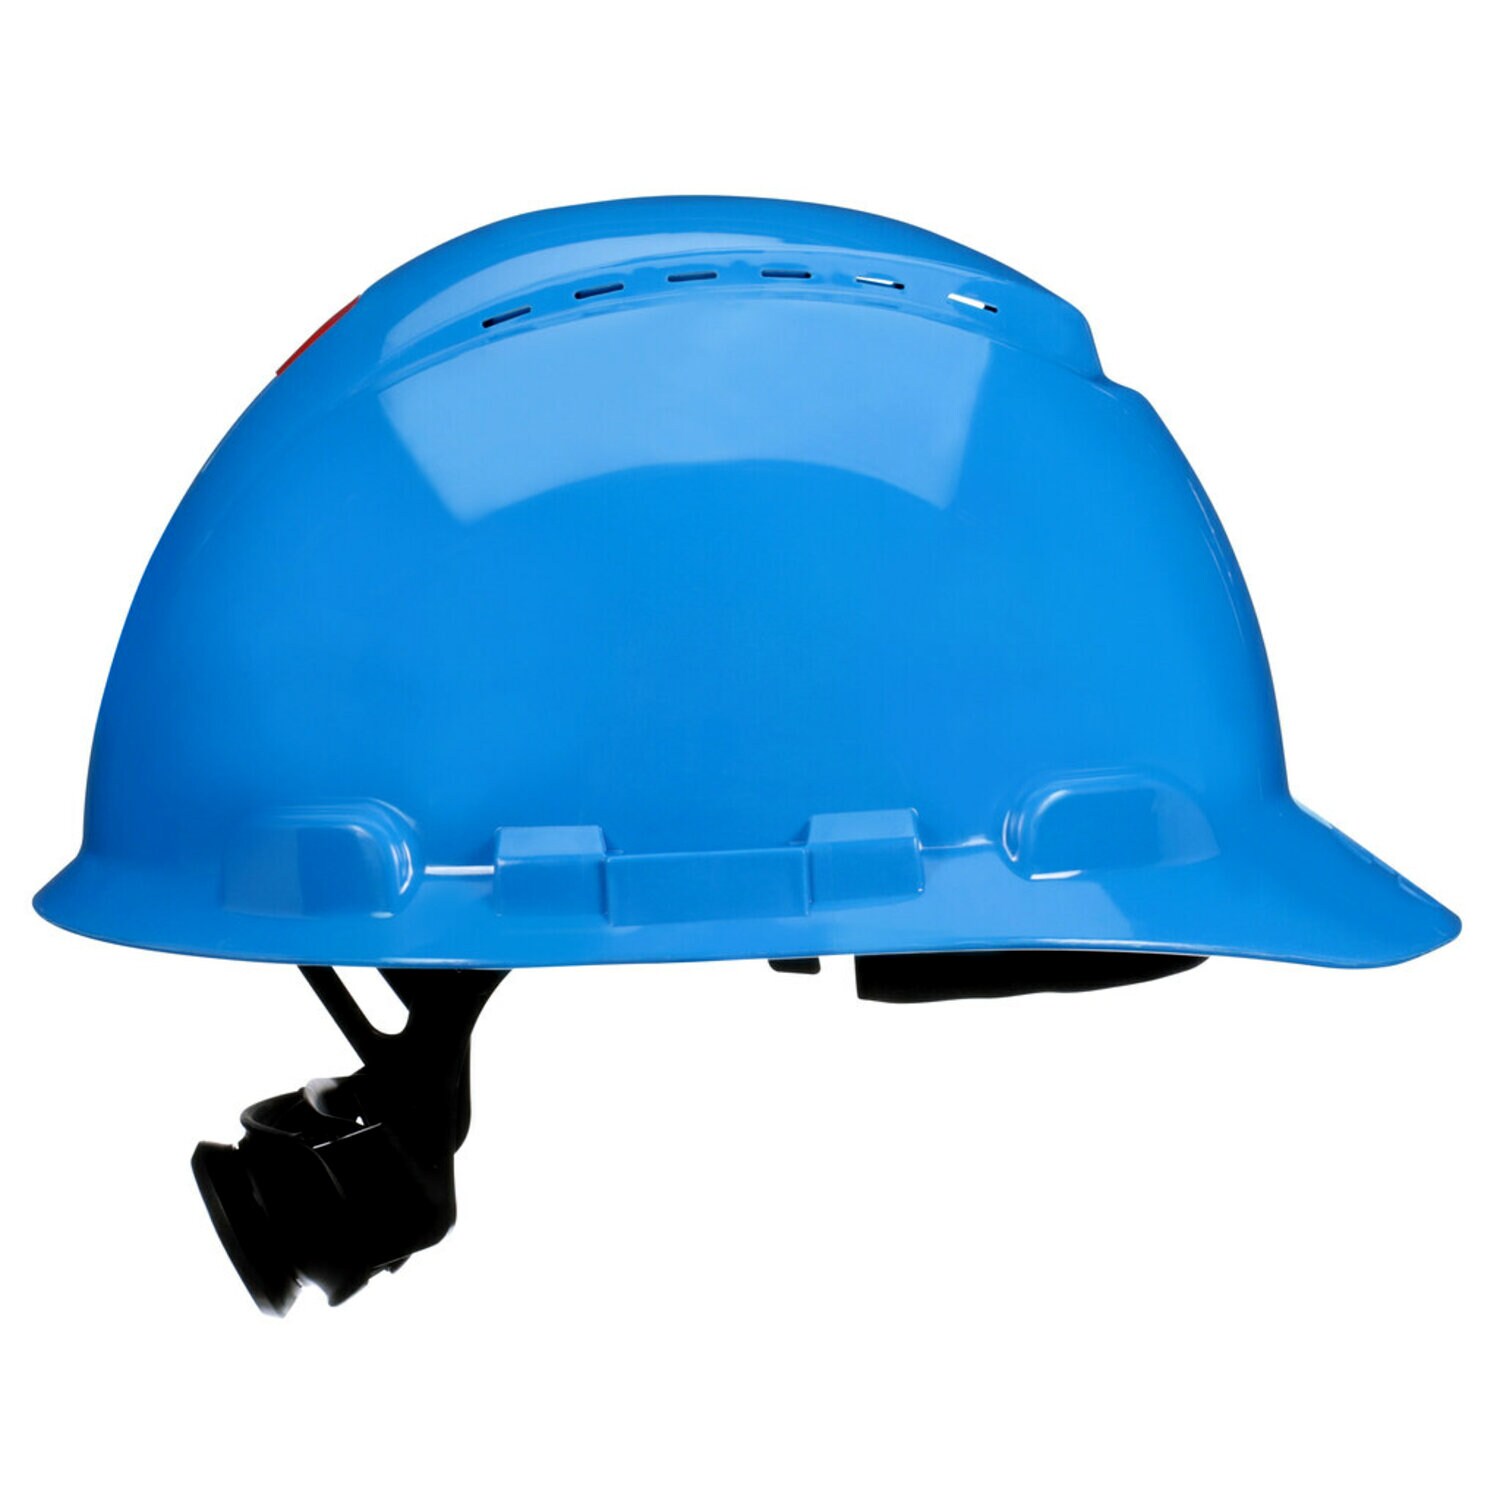 7100239988 - 3M SecureFit Hard Hat H-703SFV-UV, Blue, Vented, 4-Point Pressure Diffusion Ratchet Suspension, with UVicator, 20 ea/Case